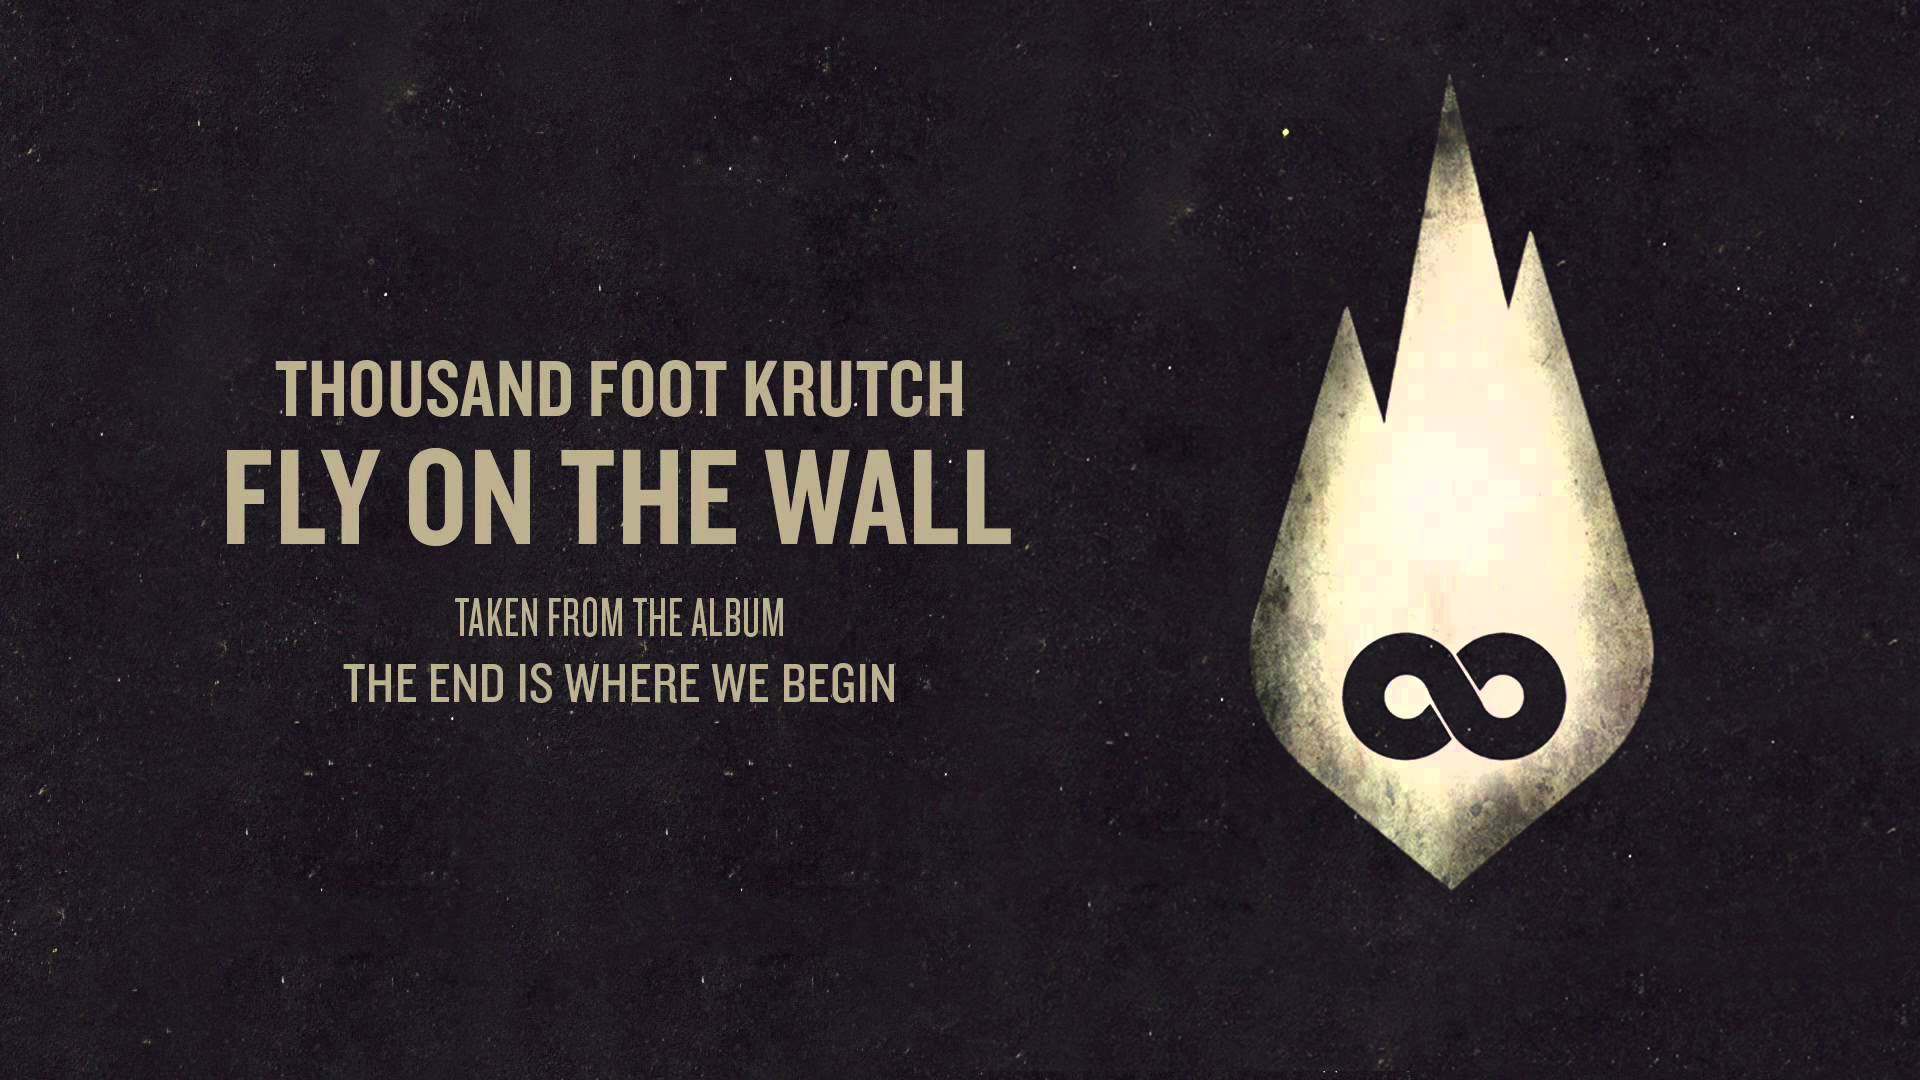 Thousand Foot Krutch: Fly On The Wall (Official Audio) - YouTube